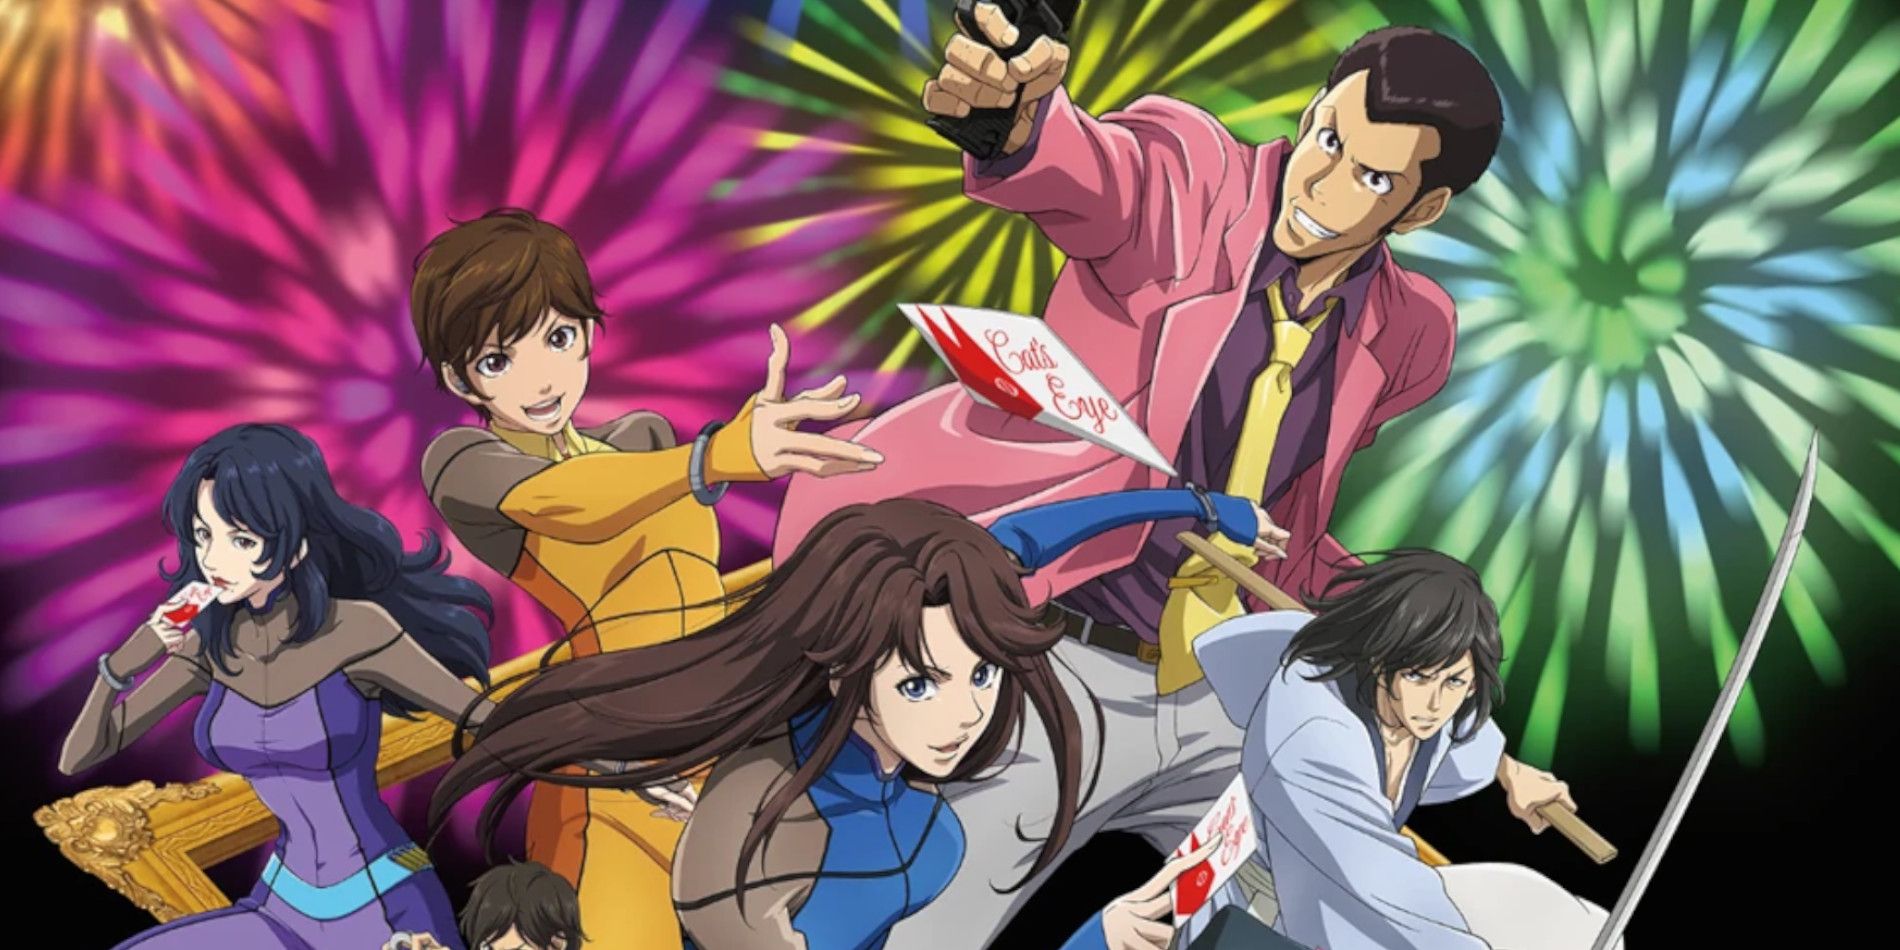 Lupin the third anime HD wallpapers | Pxfuel